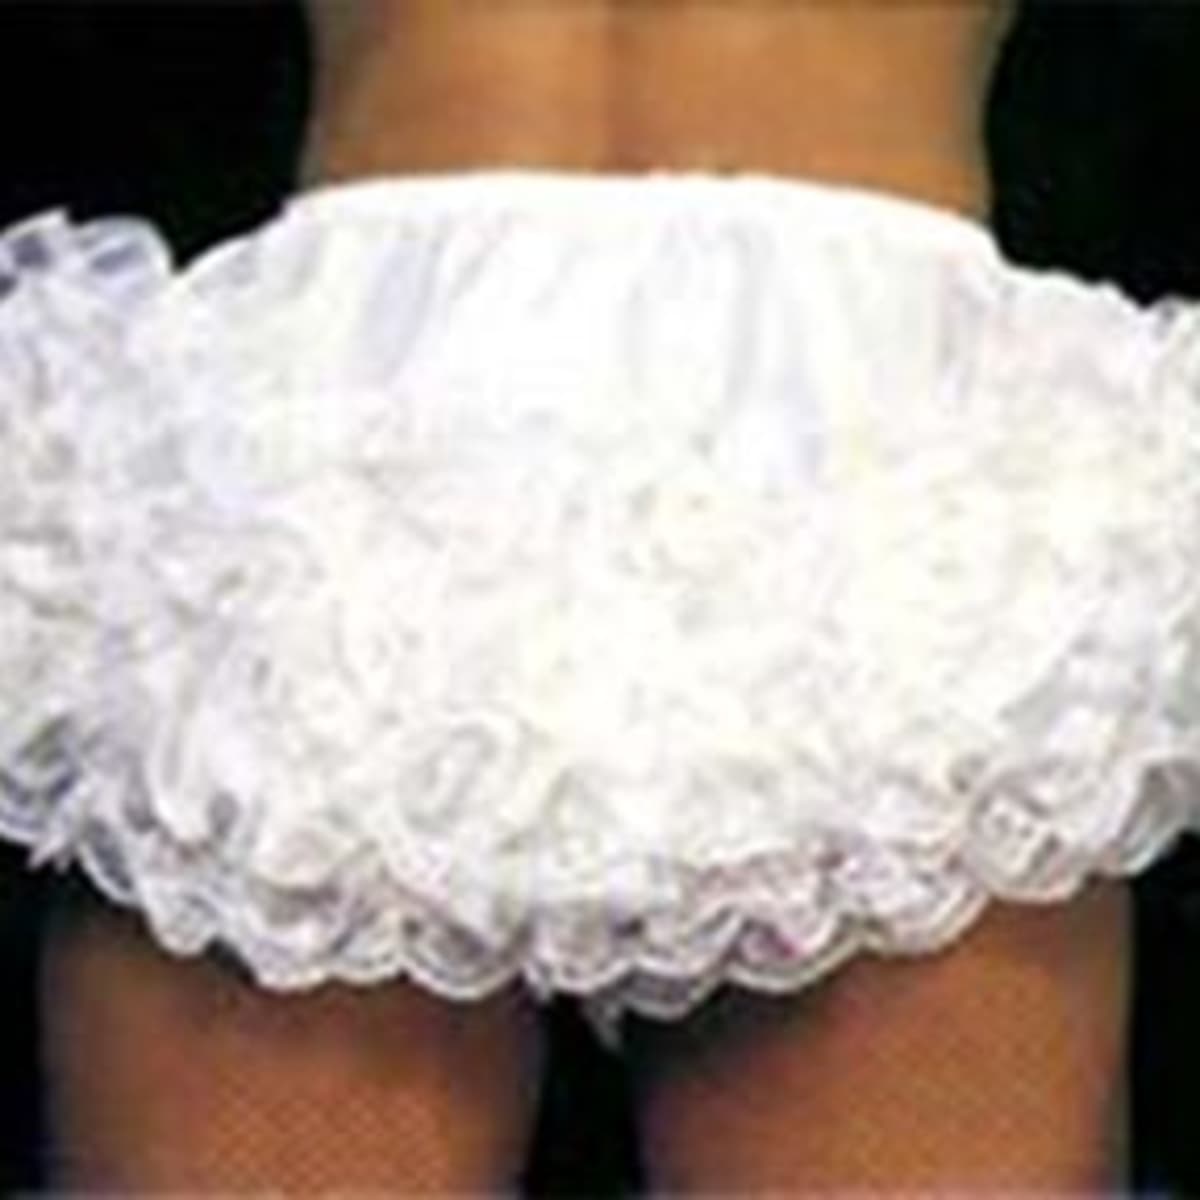 How to Avoid Showing Panty Lines - Are Panty Lines Okay? - HubPages